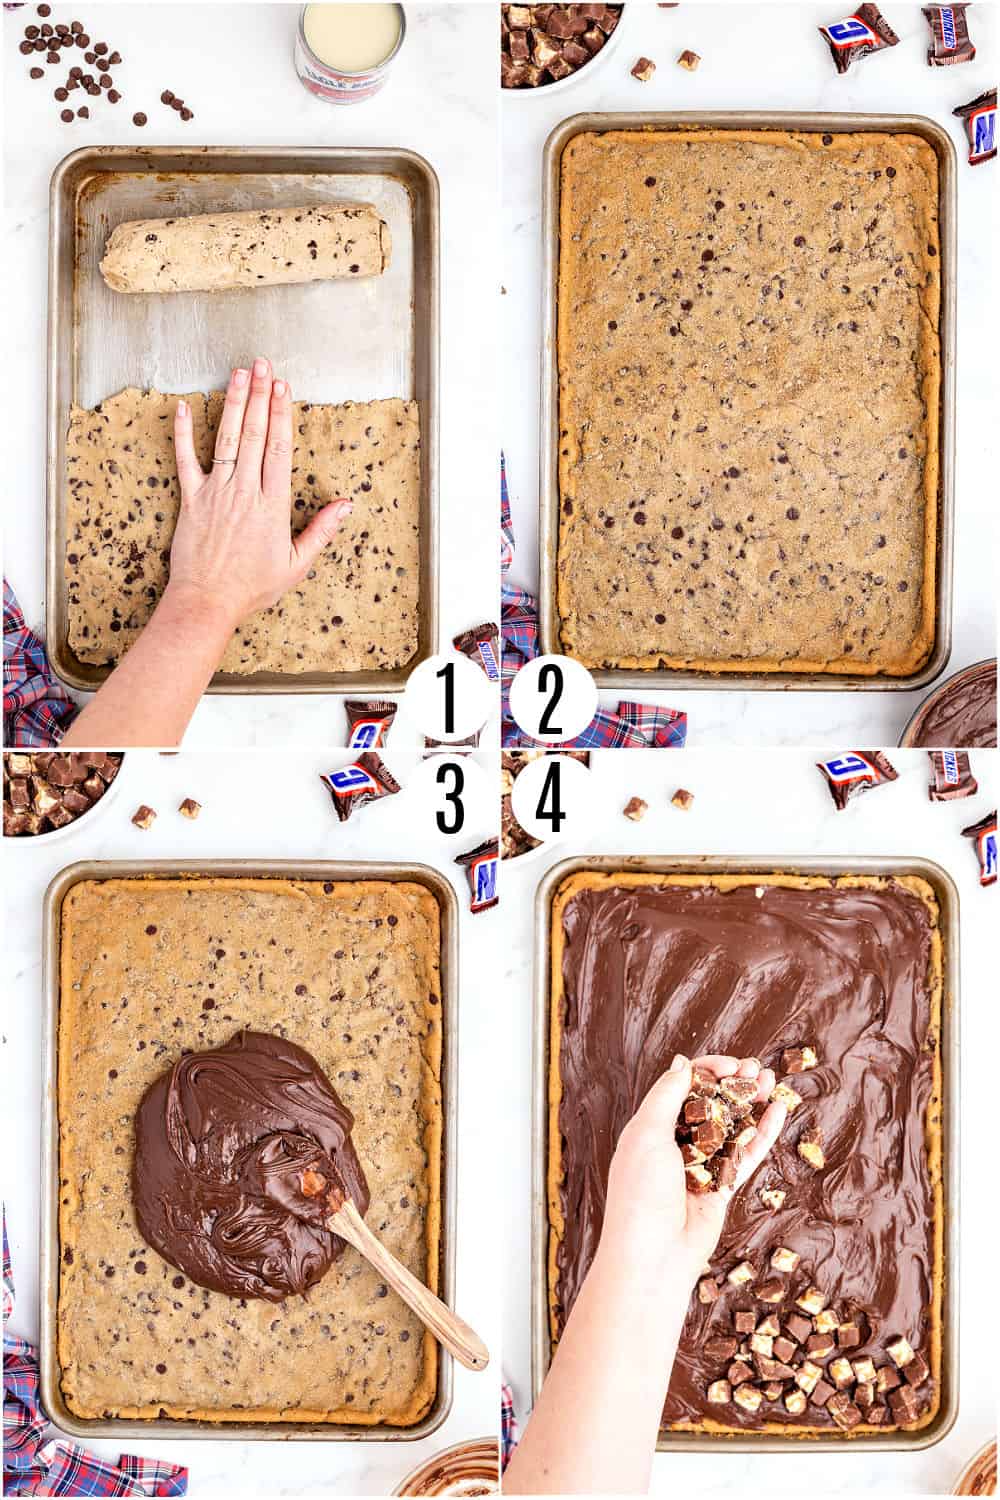 Step by step photos showing how to make chocolate chip snickers cookie bars.